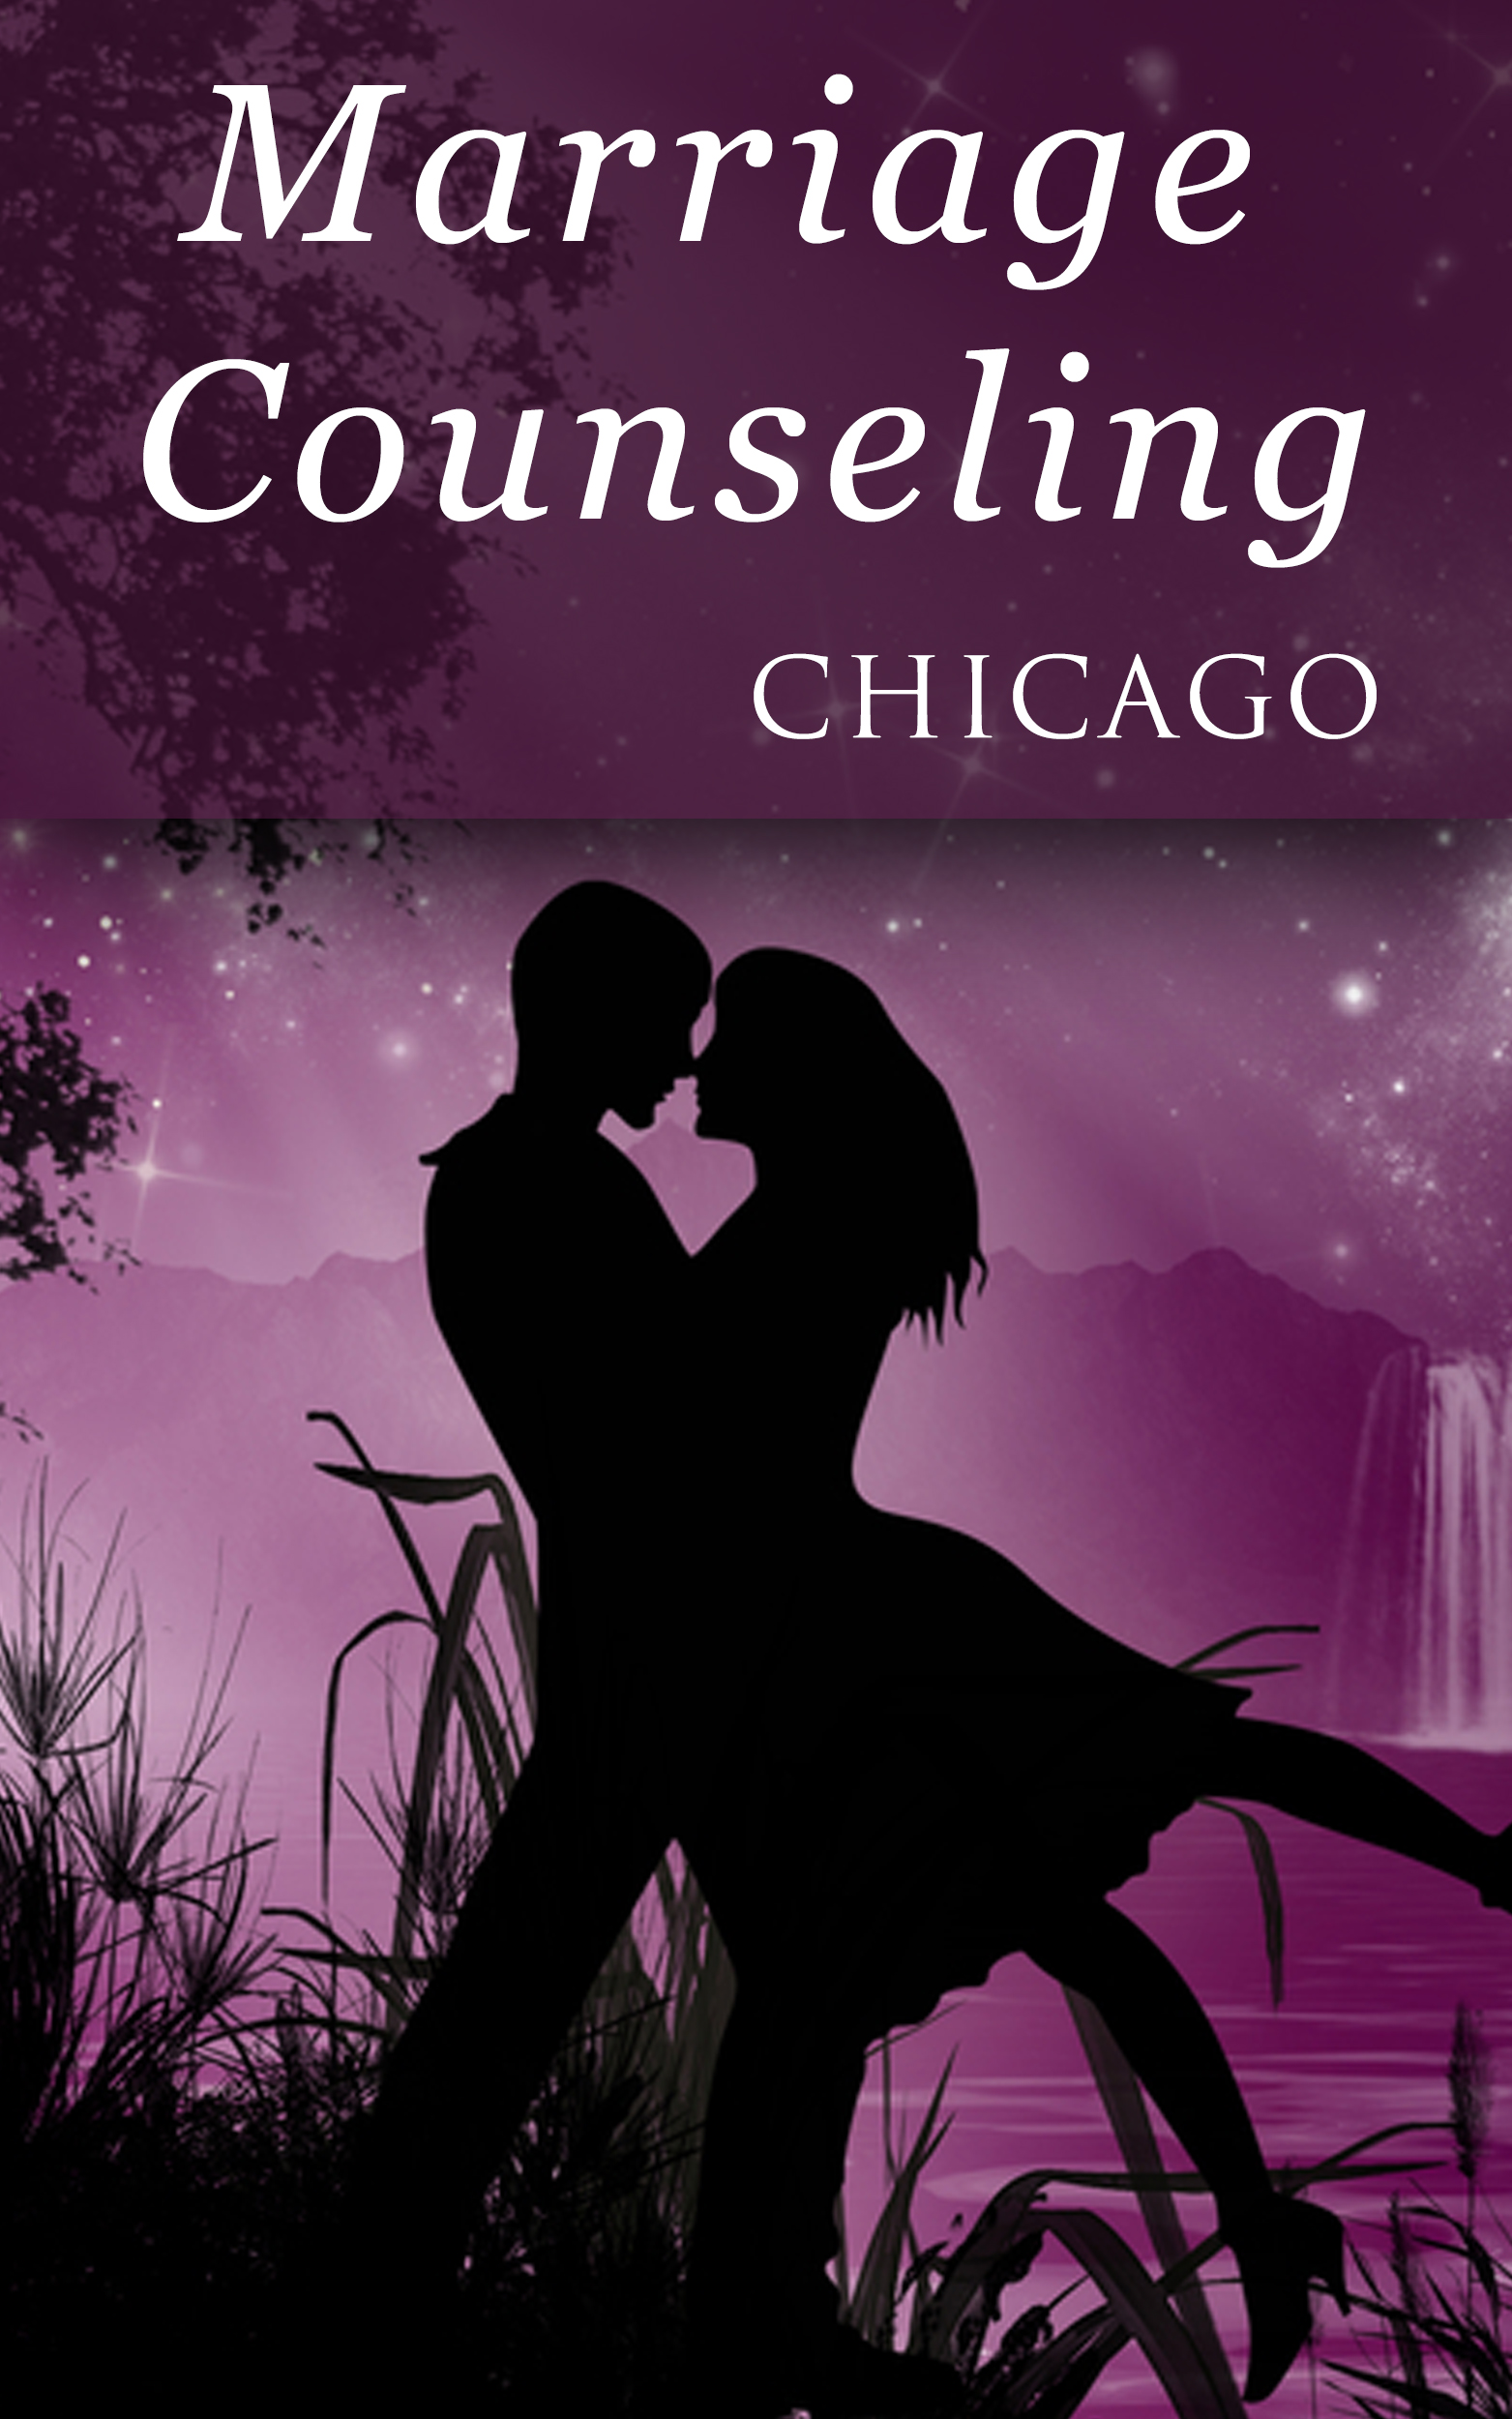 marriage counseling chicago, couples counseling chicago, chicago, il 60613